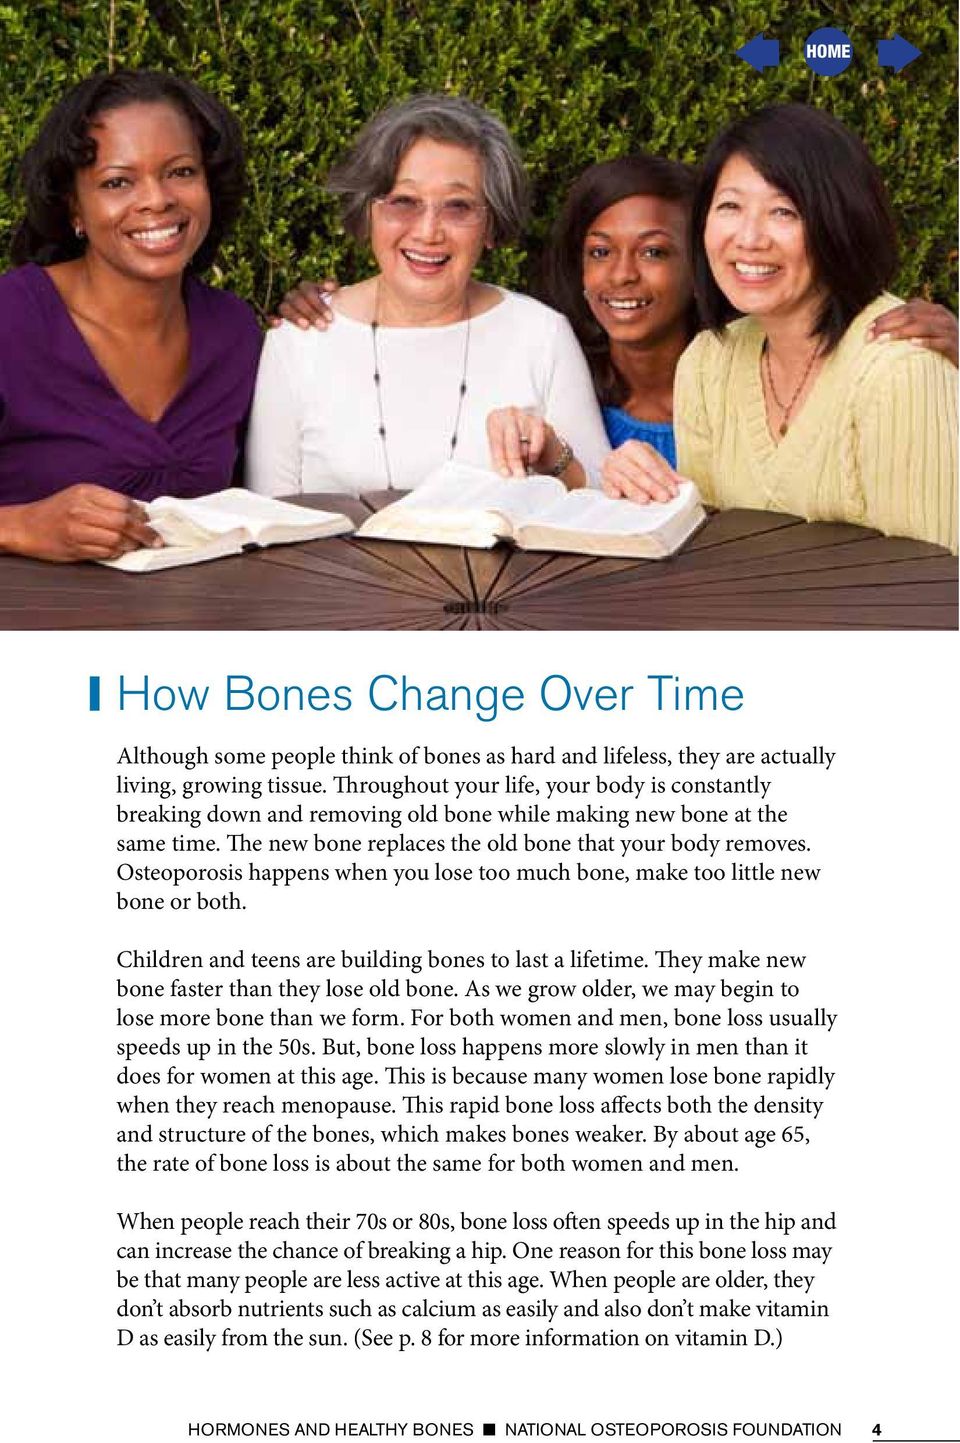 Osteoporosis happens when you lose too much bone, make too little new bone or both. Children and teens are building bones to last a lifetime. They make new bone faster than they lose old bone.